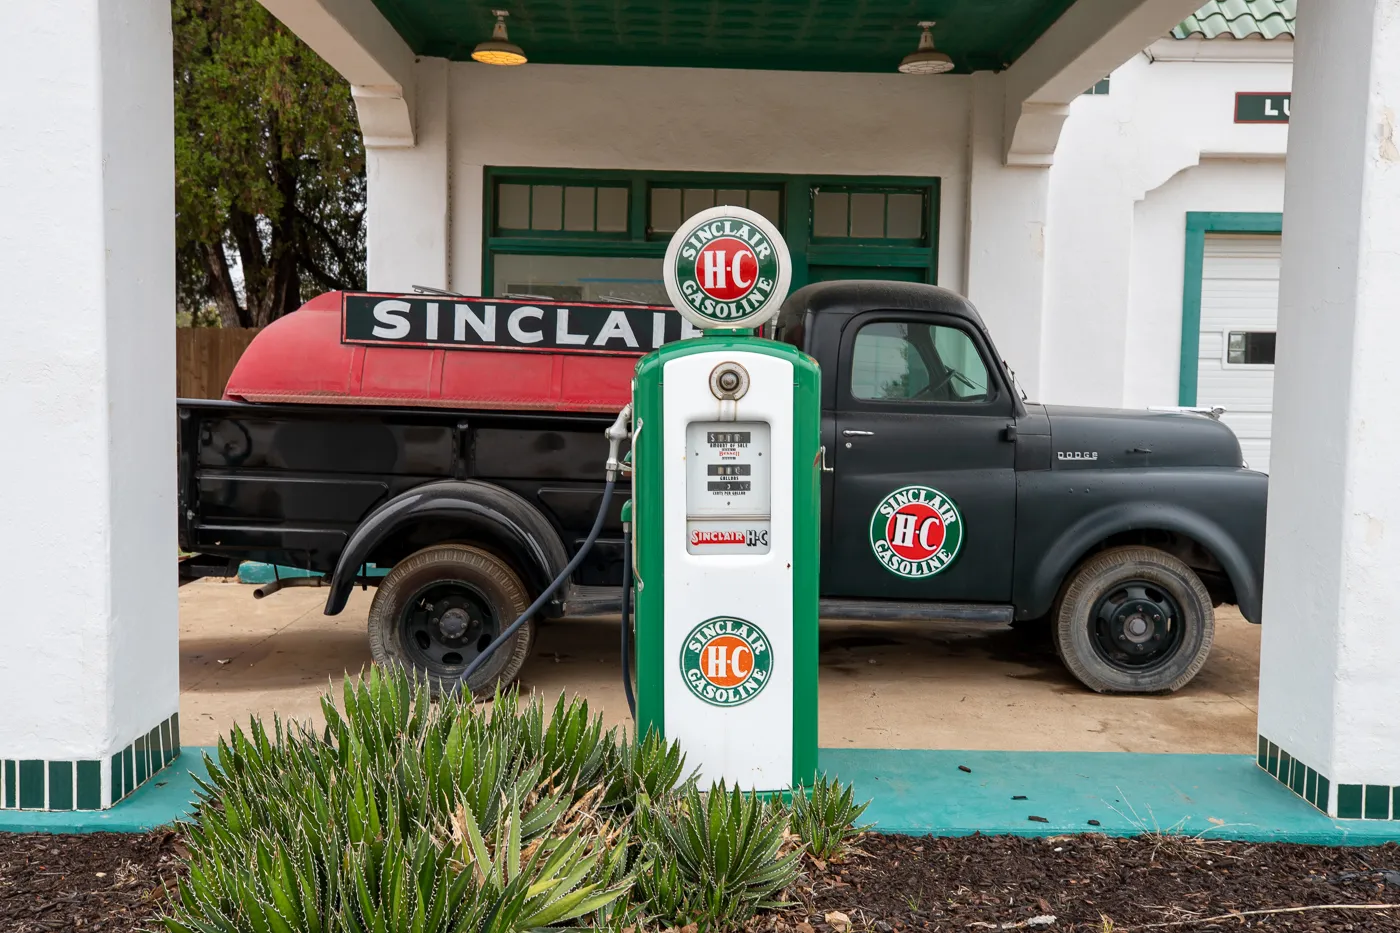 Restored Sinclair Gas Station in Albany, Texas